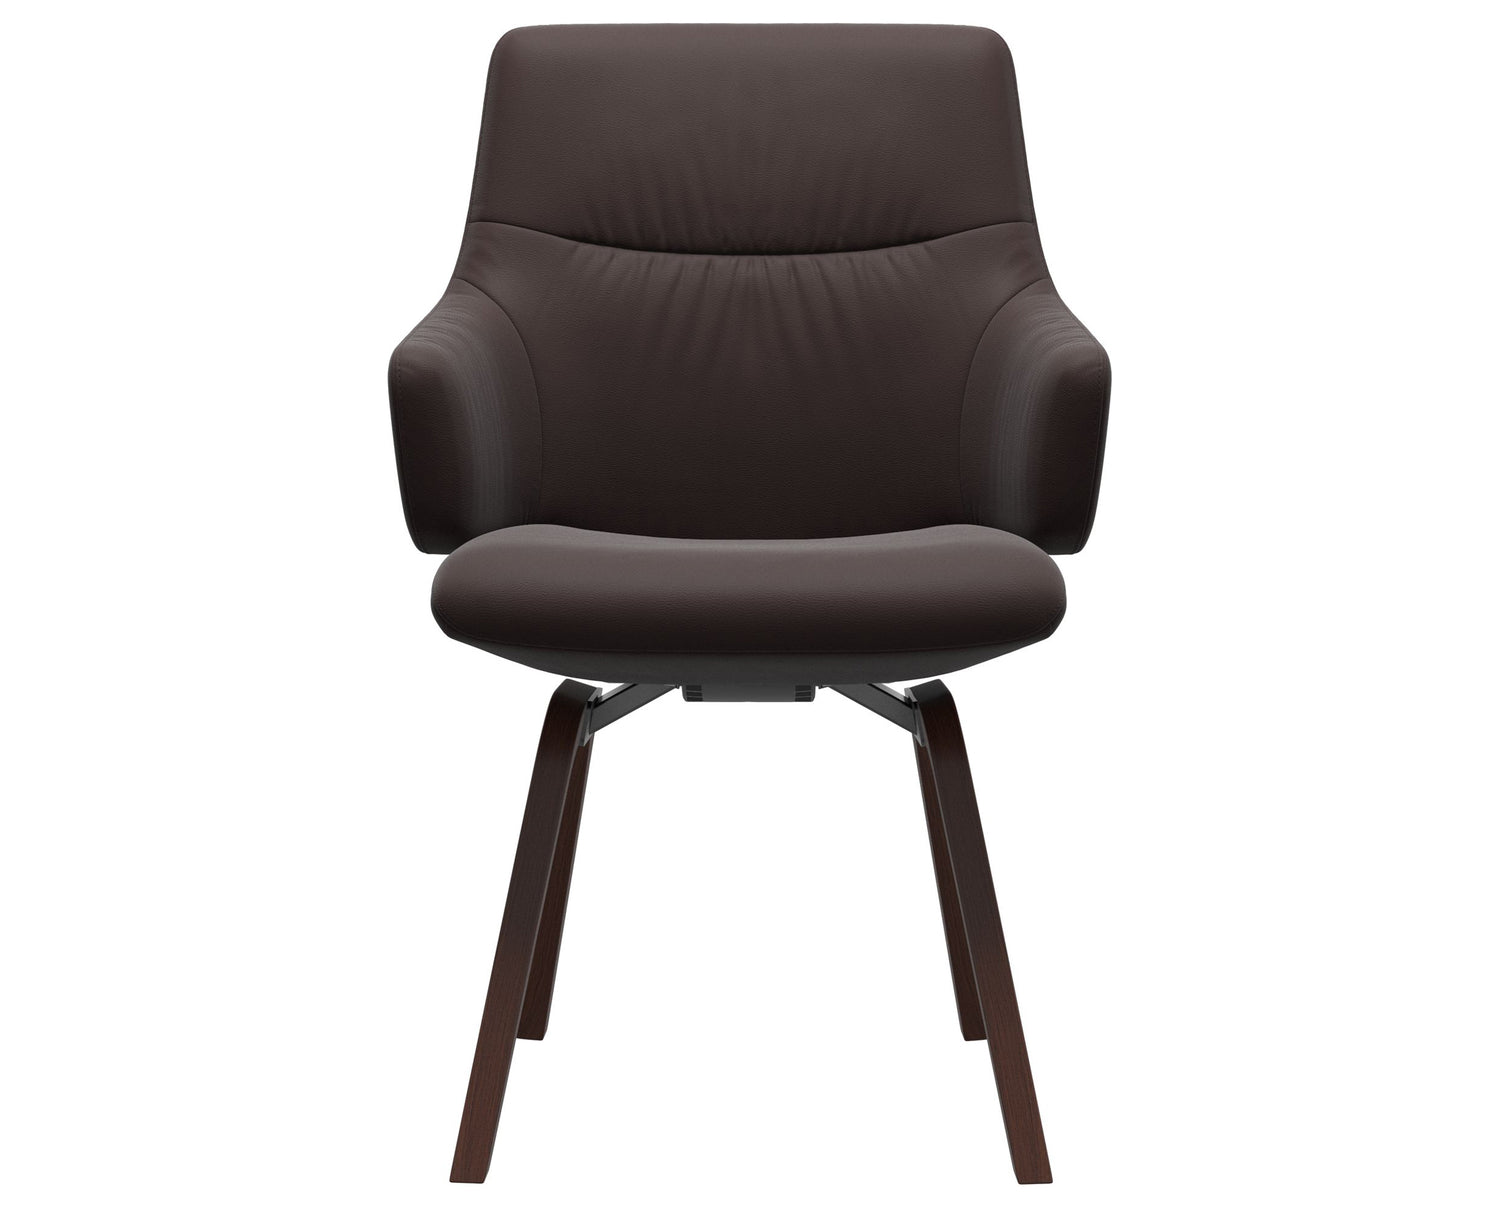 Paloma Leather Chocolate & Walnut Base | Stressless Mint Low Back D200 Dining Chair w/Arms | Valley Ridge Furniture